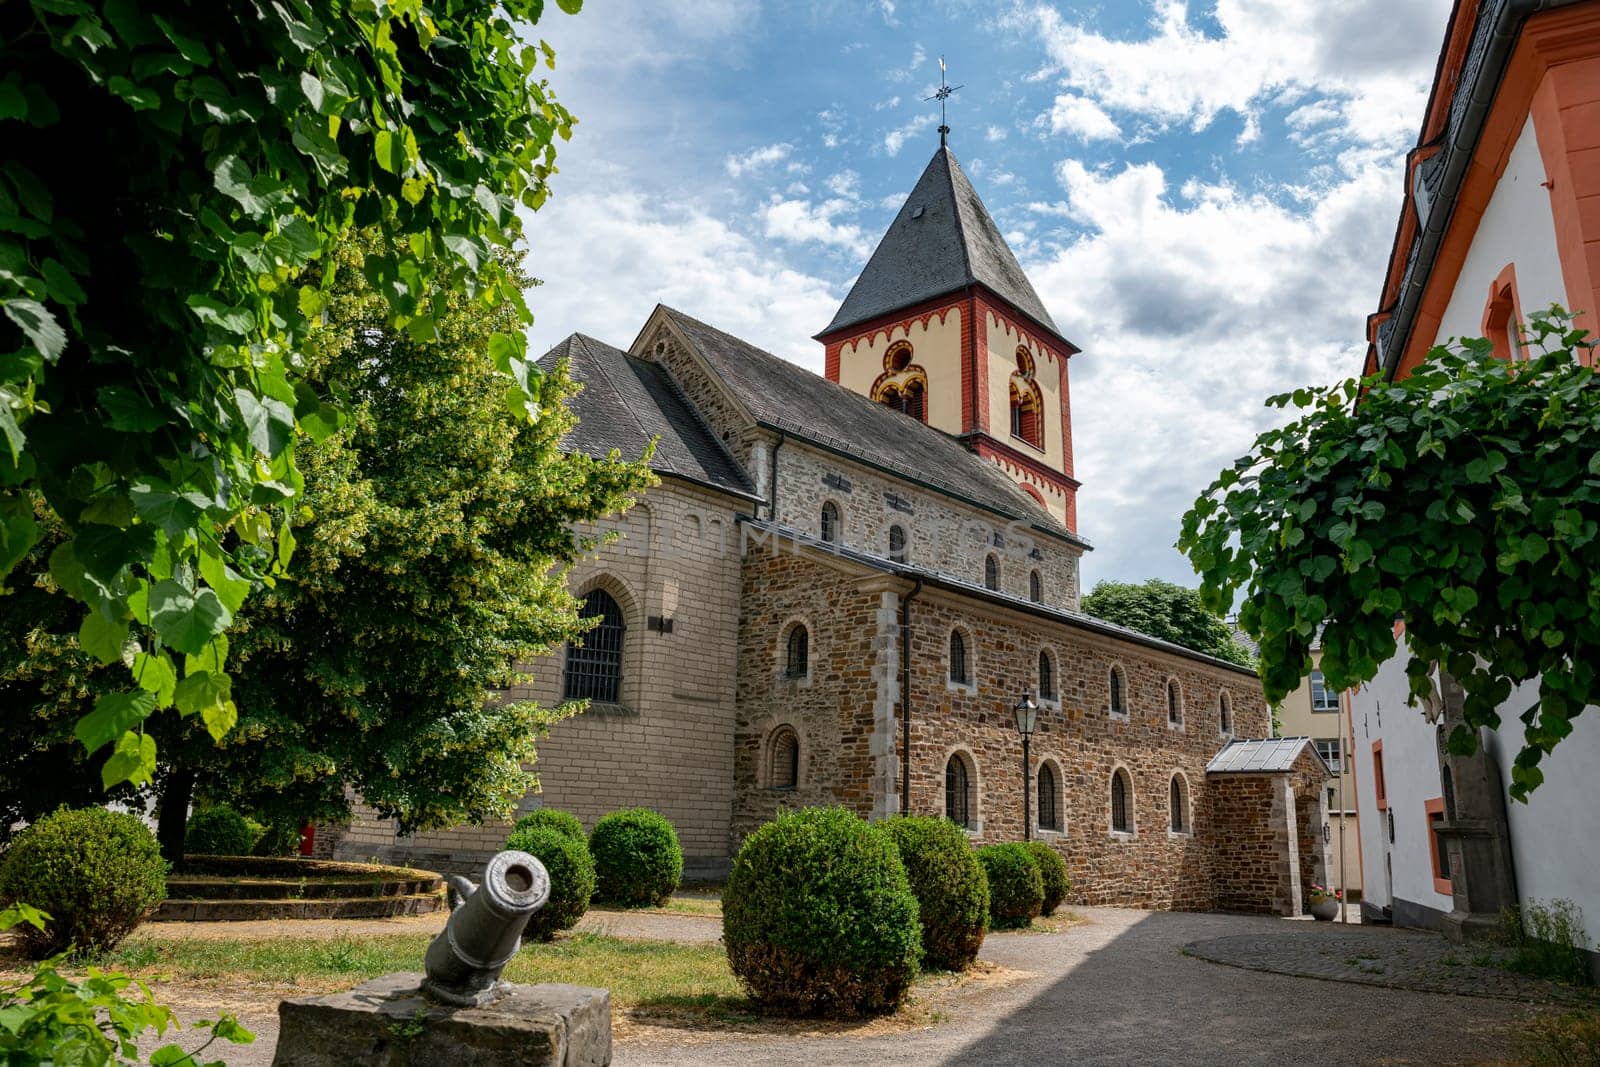 the church and a cannon in the town of erpel in germany by compuinfoto